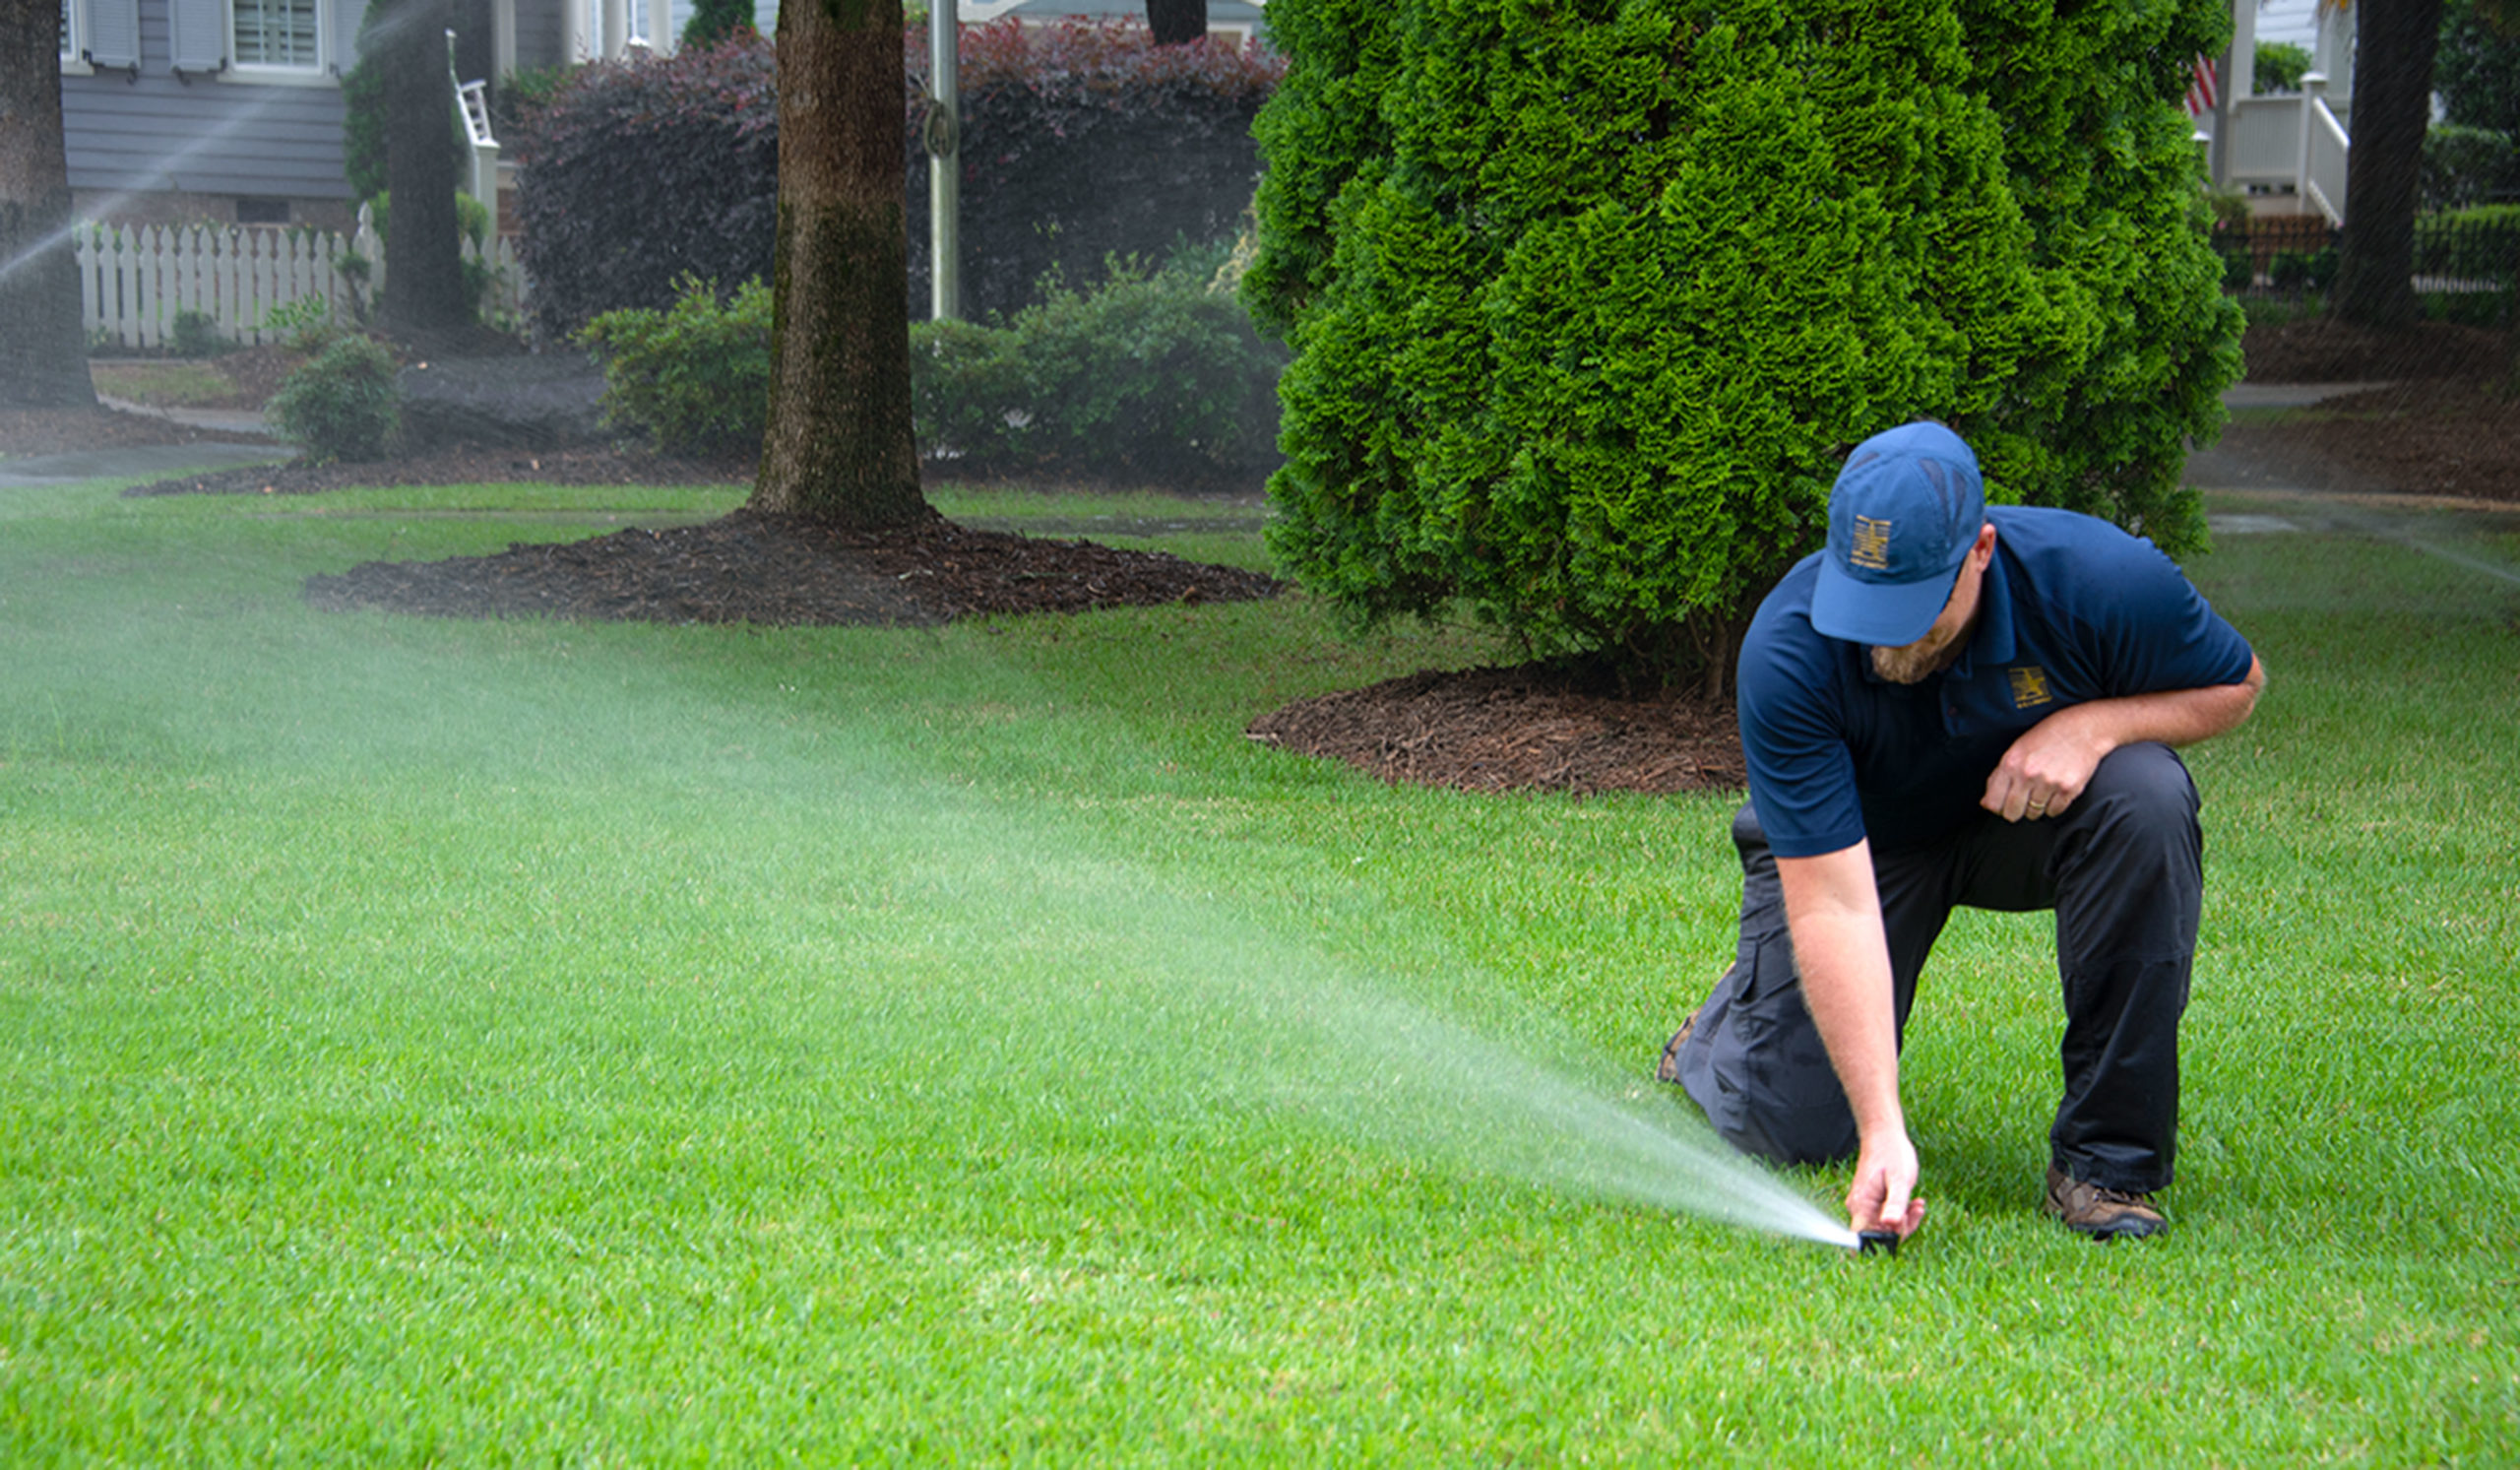 Irrigation Affects Your Landscape, Your Budget & the Environment